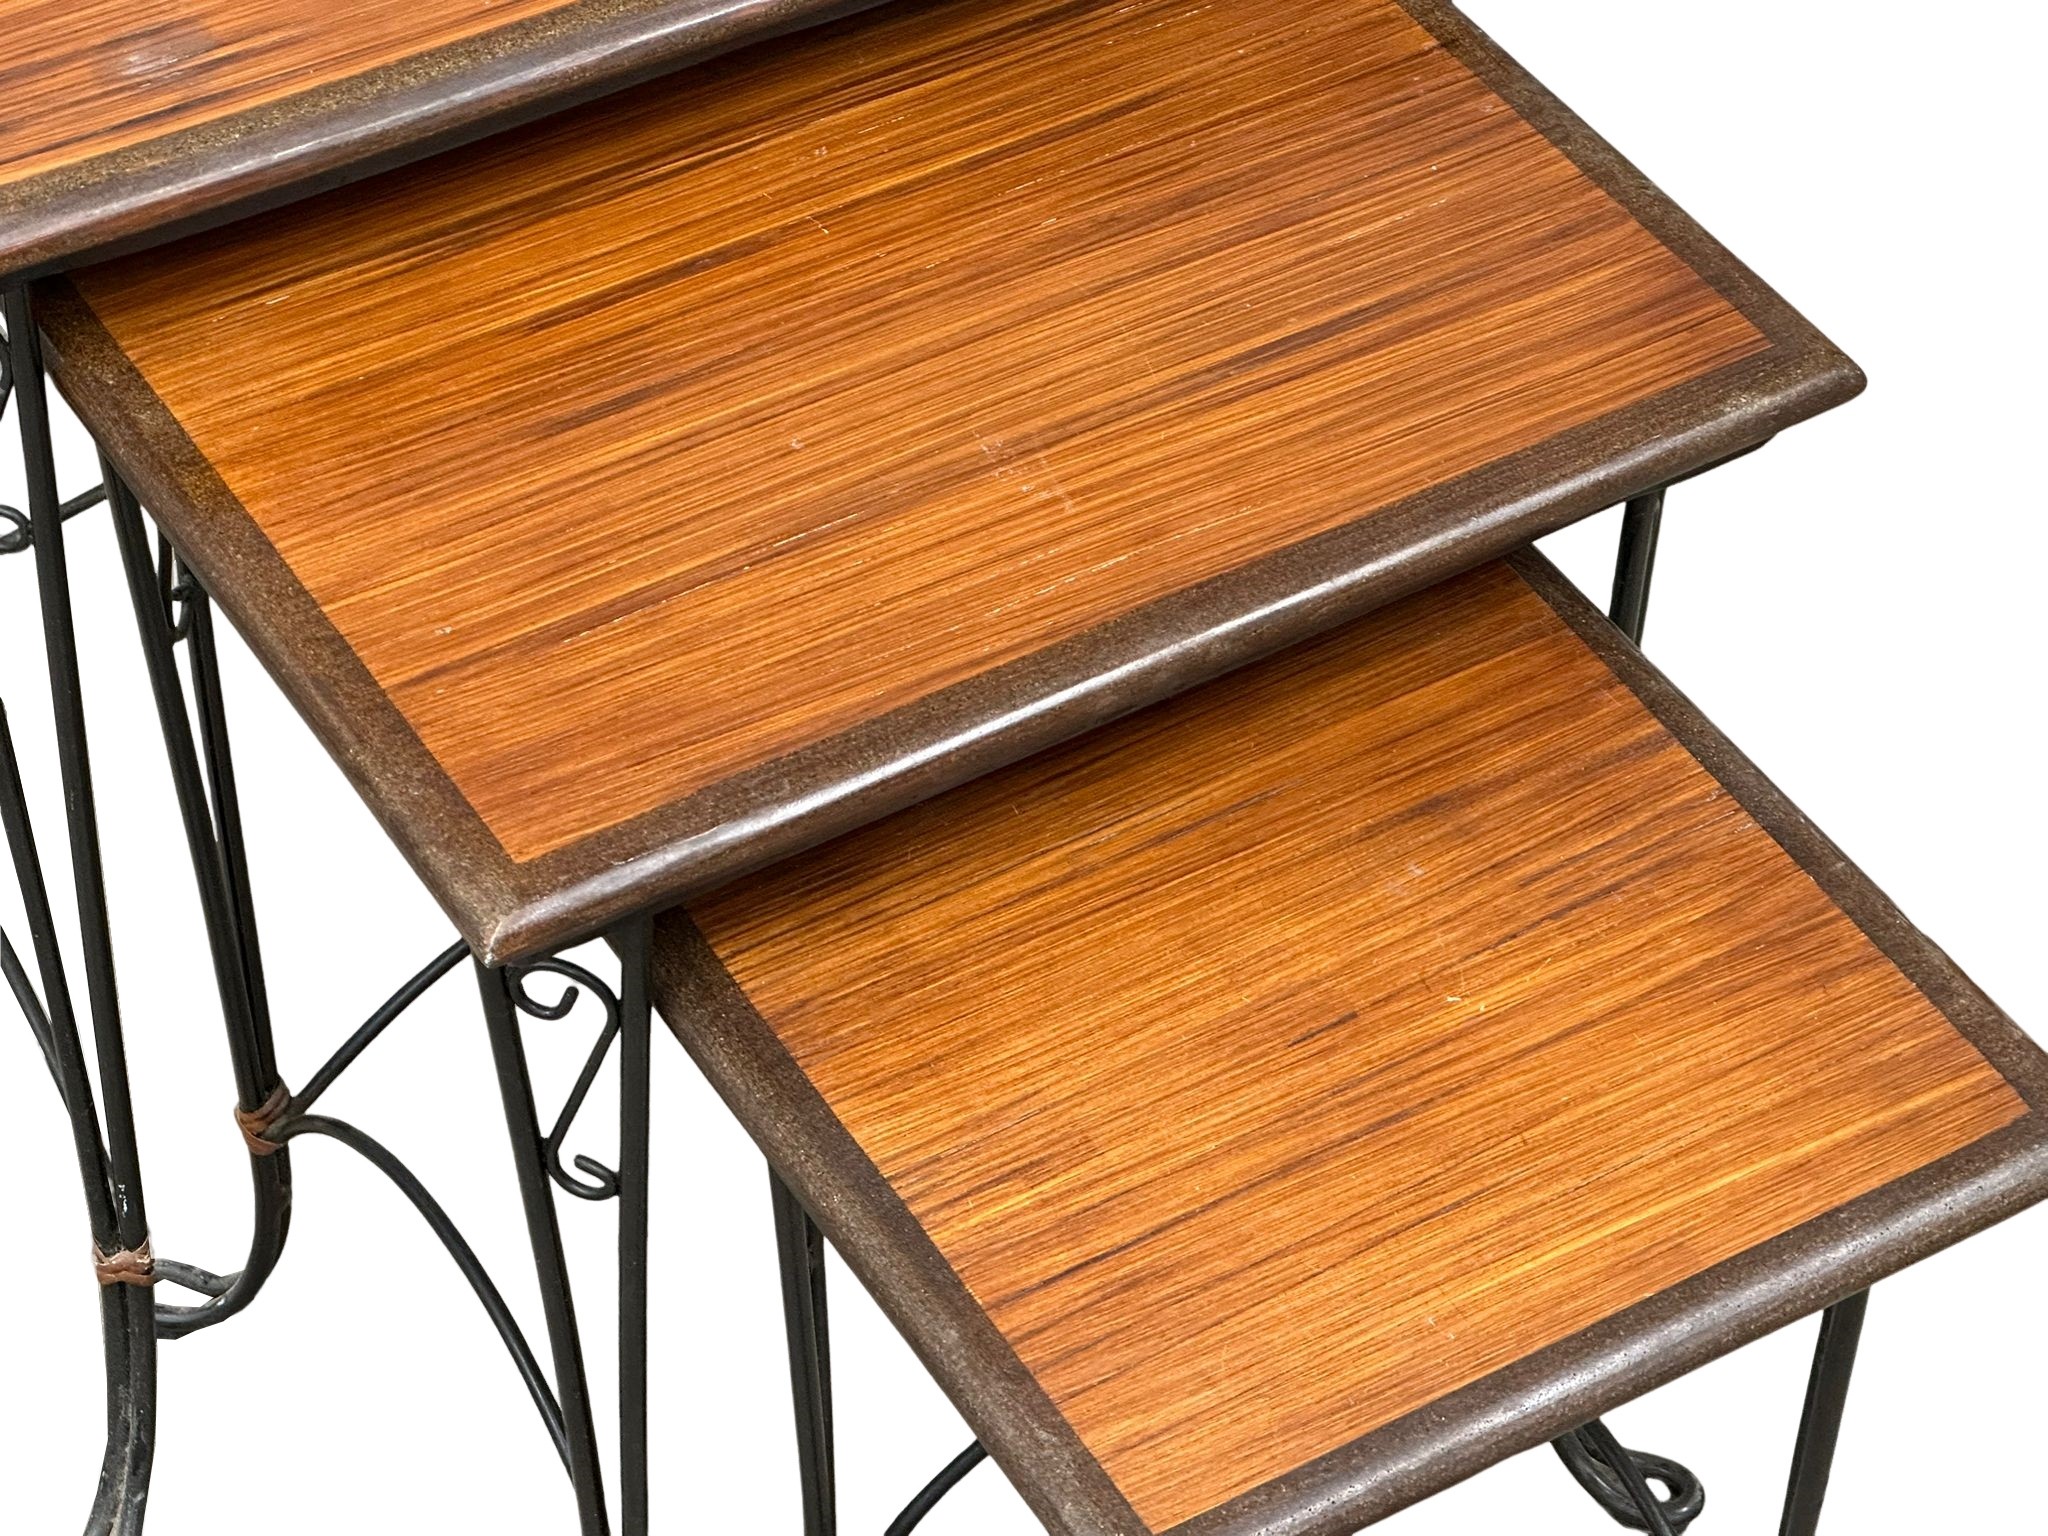 A mid century teak top nest of tables with wrought iron base. 62.5x42x63.5cm - Image 2 of 3